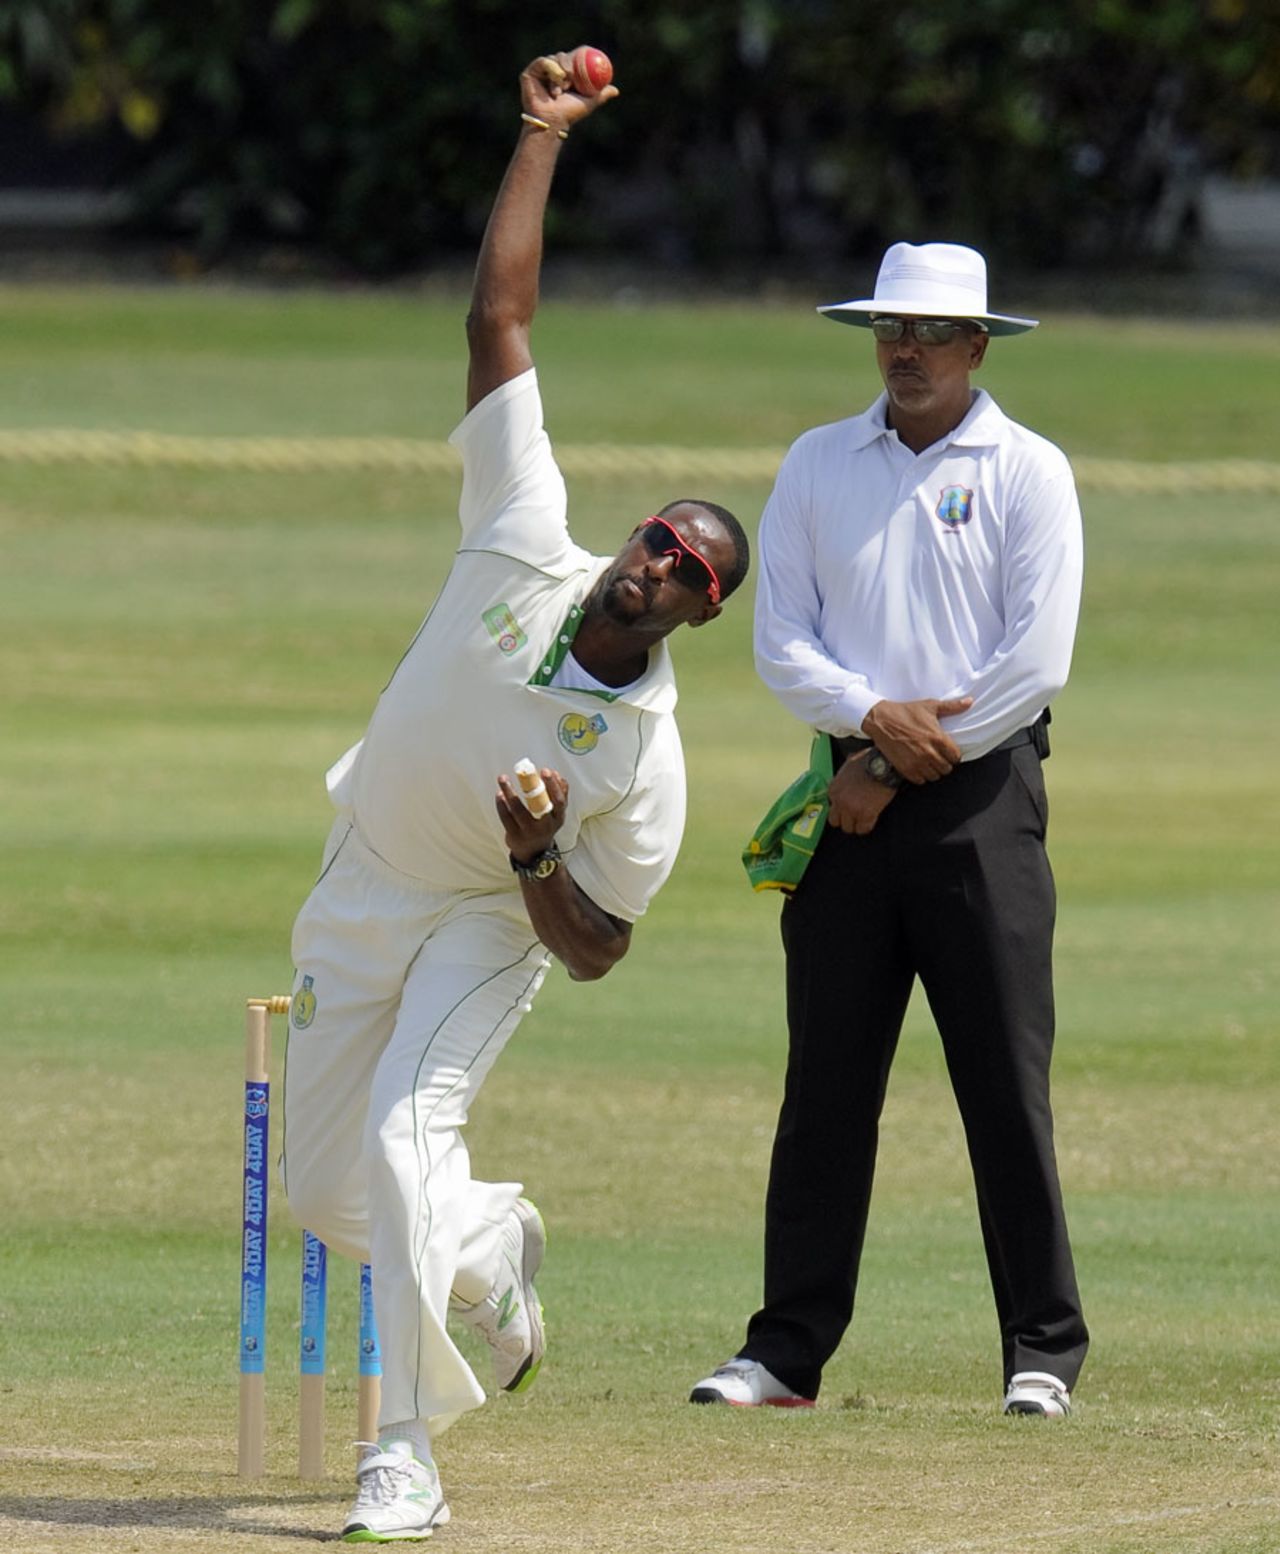 Shane Shillingford took two wickets in the innings, Windward Islands v Jamaica, Regional Four Day Competition, final, 2nd day, Gros Islet, April 27, 2014